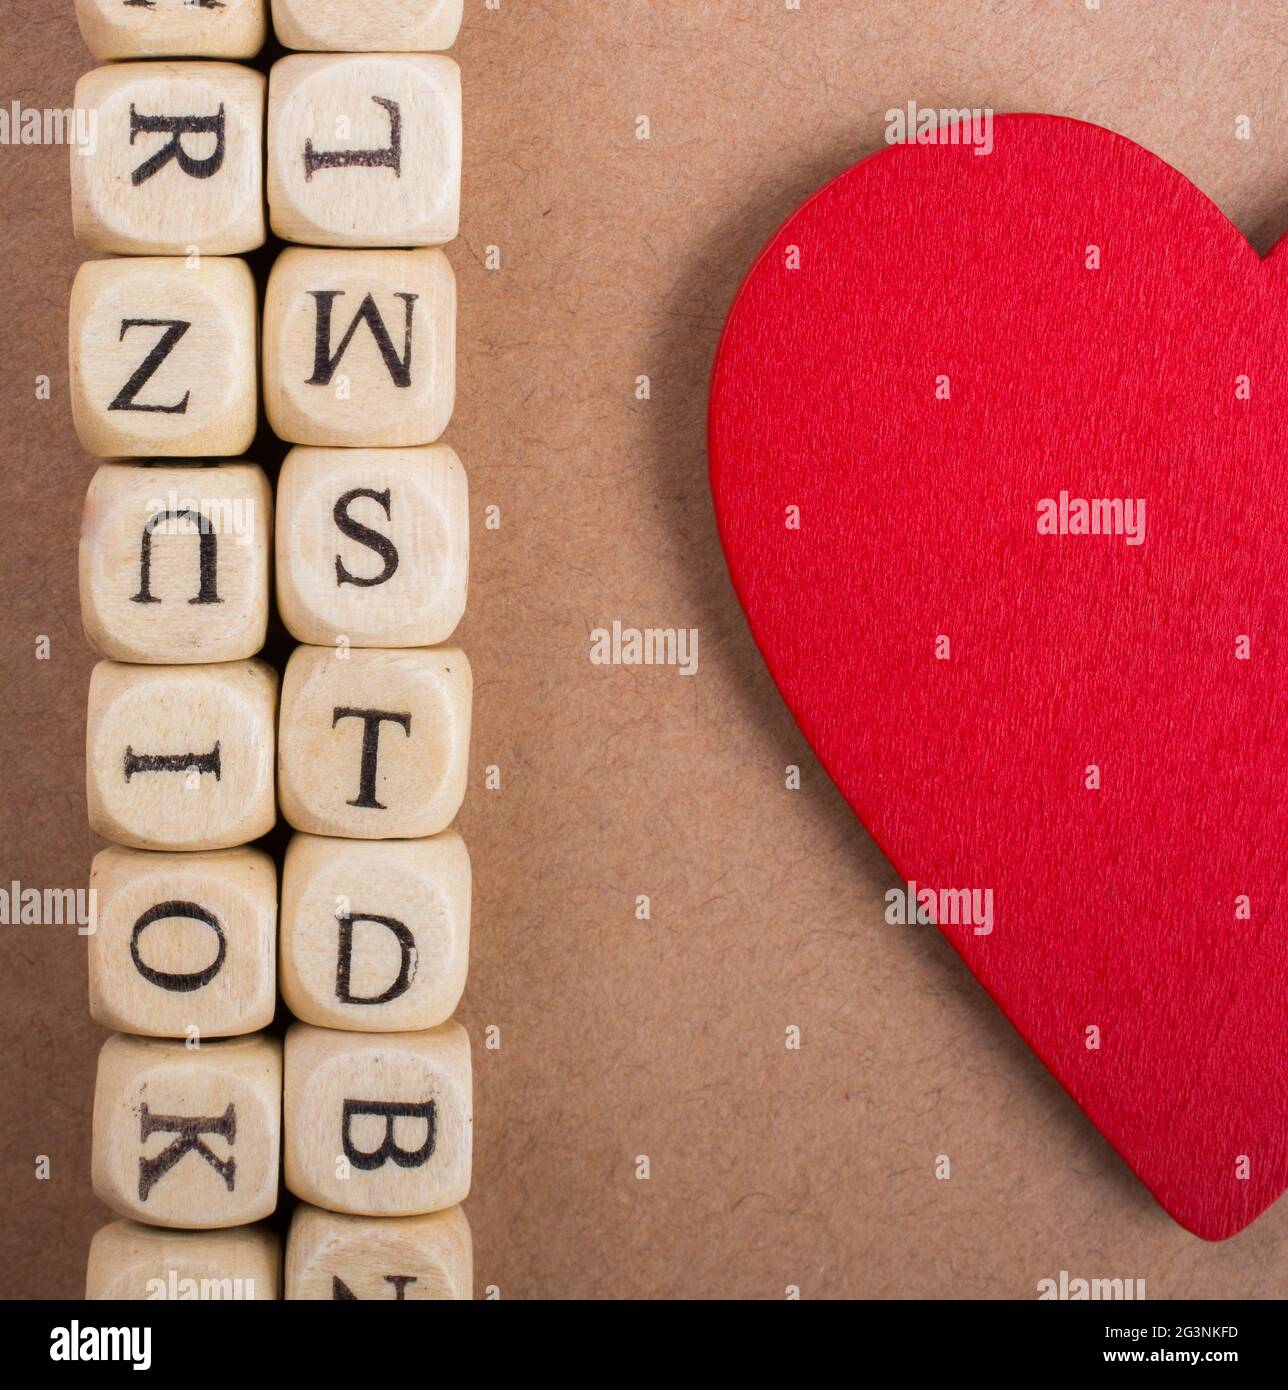 Love icon and Letter cubes of made of wood Stock Photo